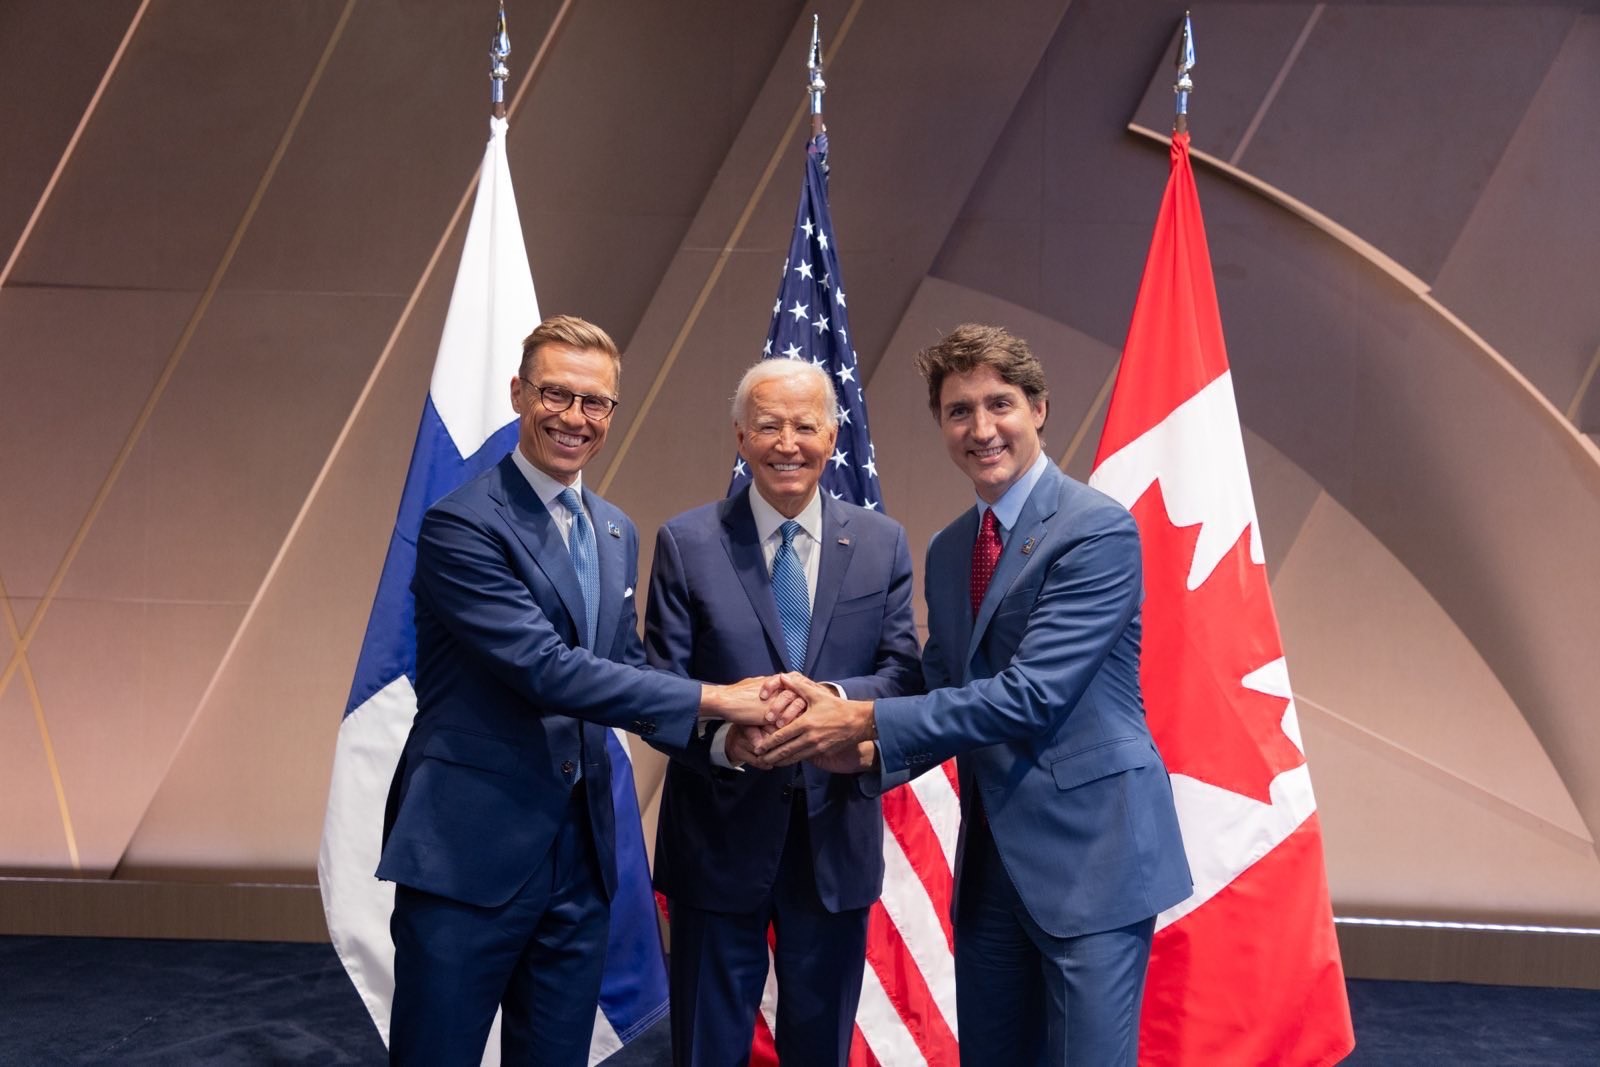 Davie plans to play a key role in support of historic partnership between Finland, Canada and the United States to build icebreakers